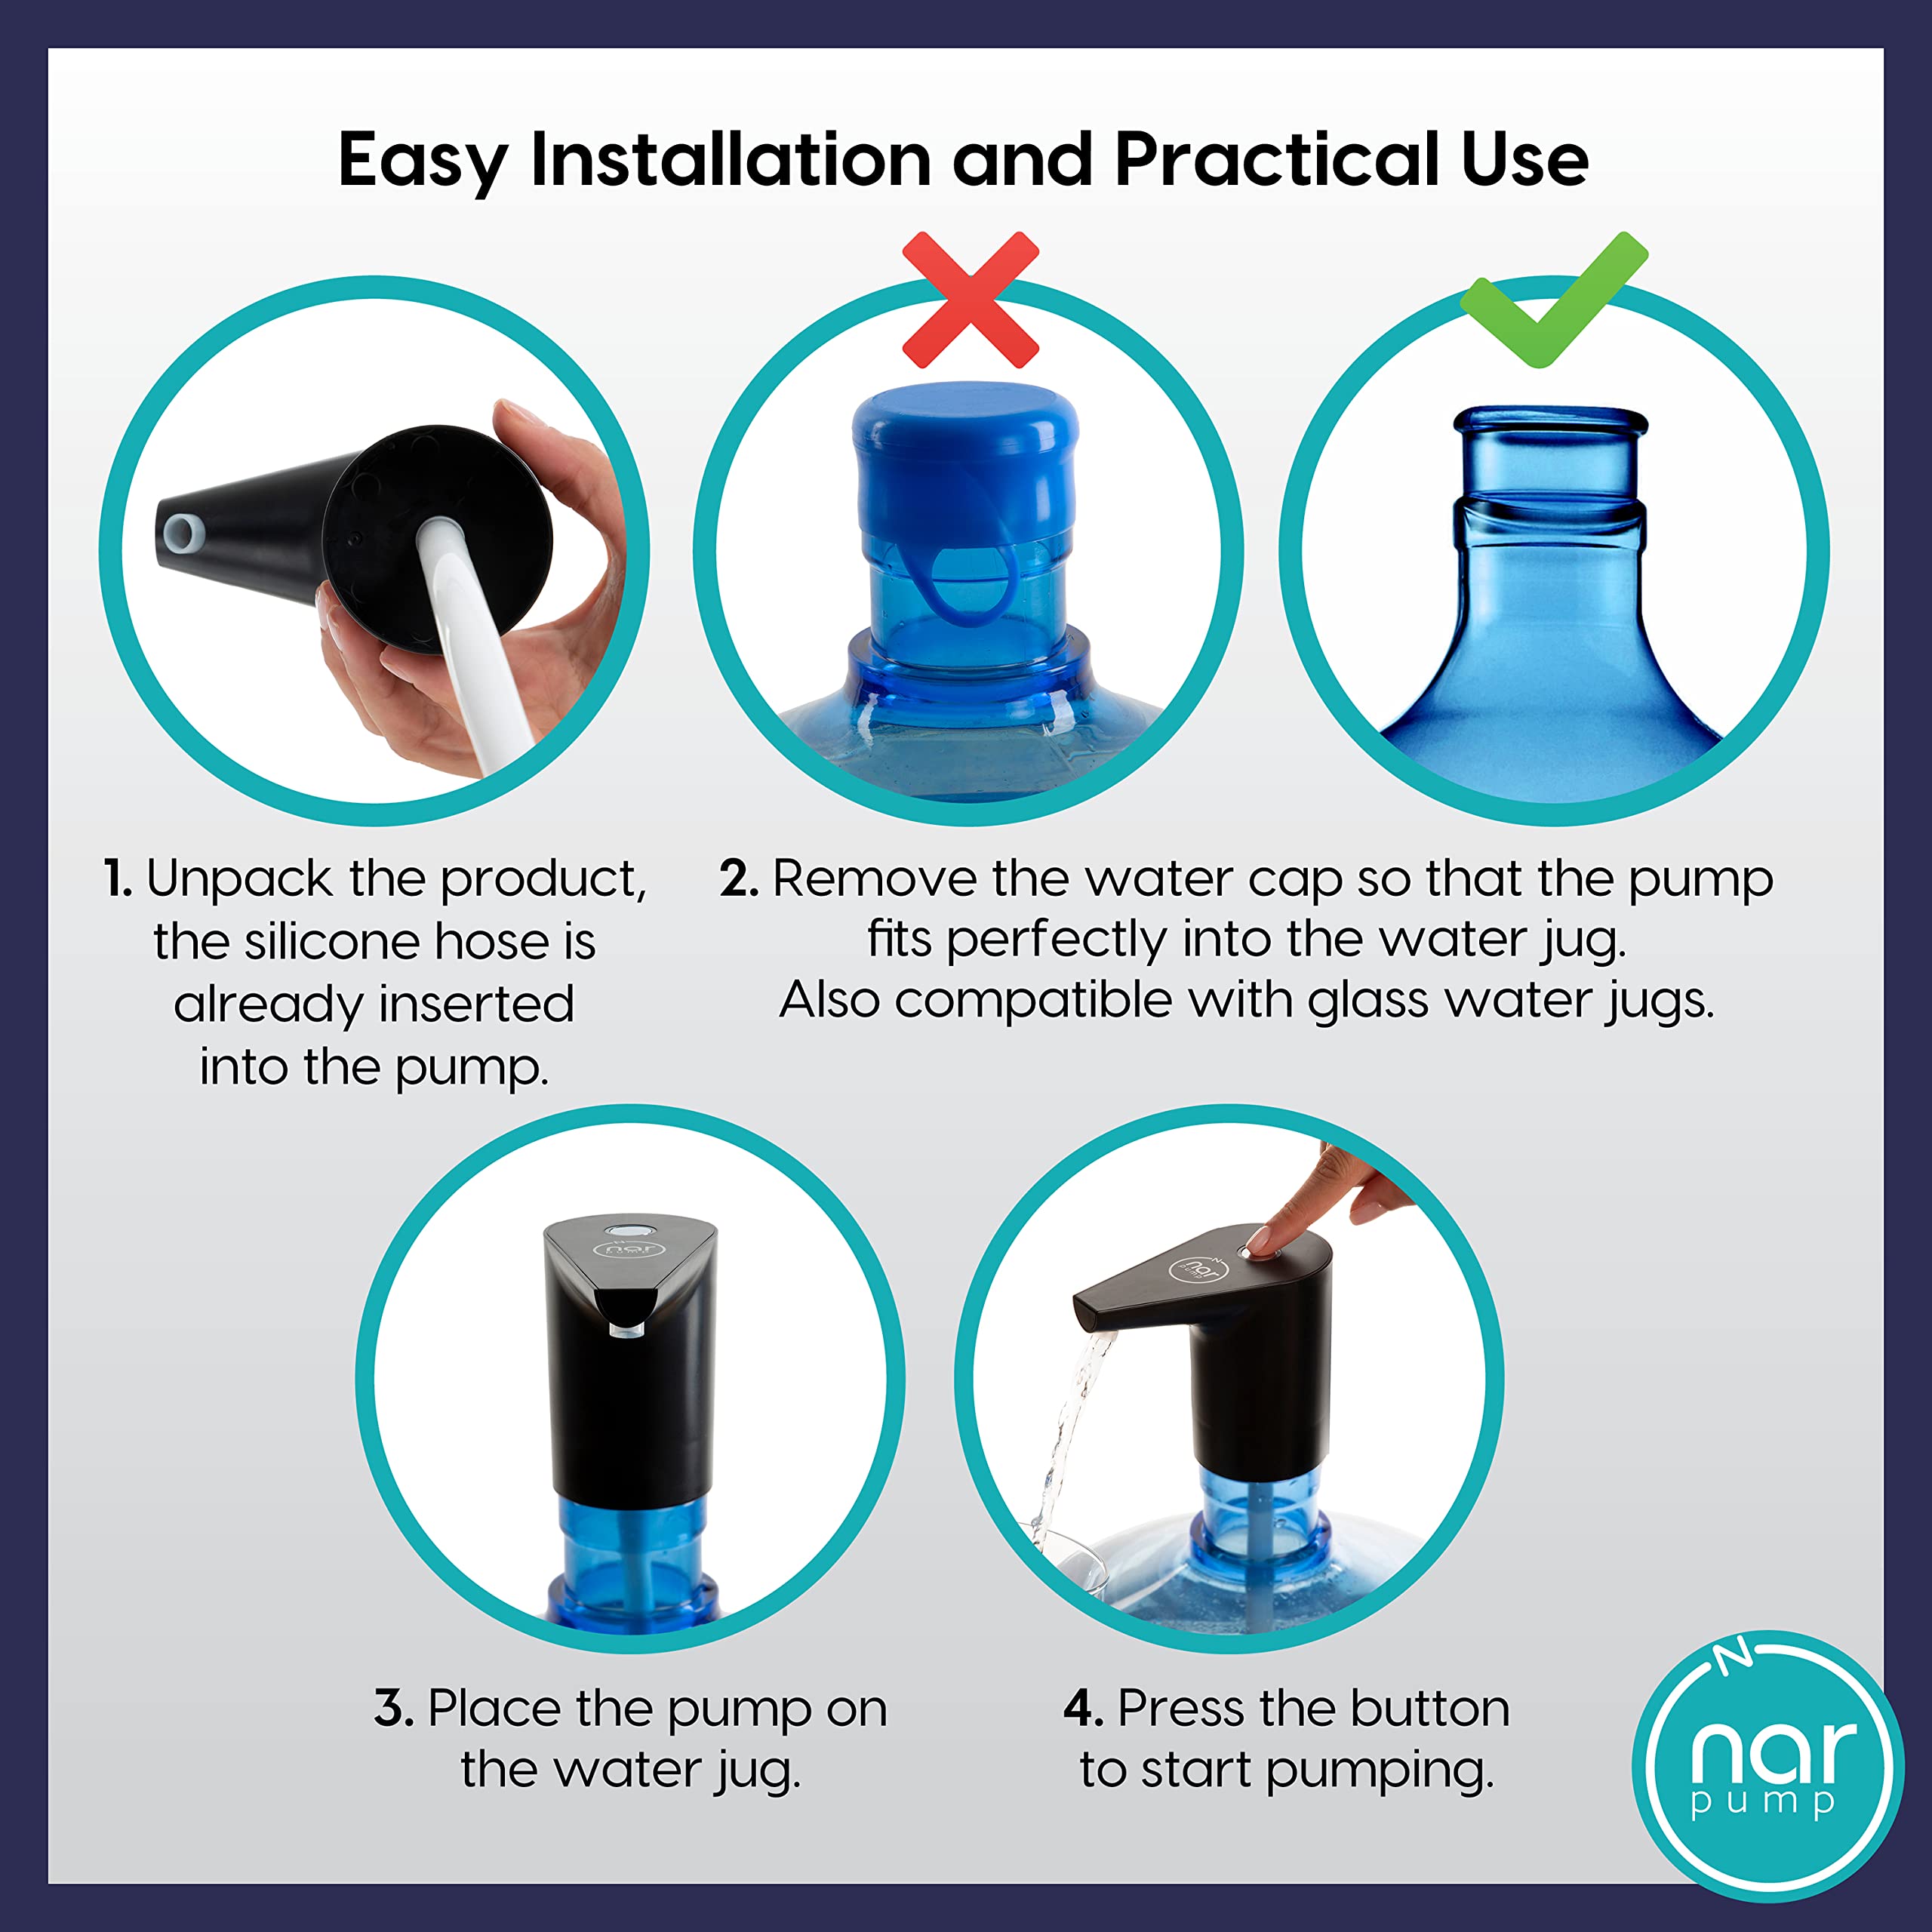 Narpump Whisper Ultra Silent, Very Fast Electric Drinking Water Bottle Dispenser Pump for 1-5 Gallon Water Jug, Portable Adapter with Child Lock for 5 Gallon Jug, USB Rechargeable, Black